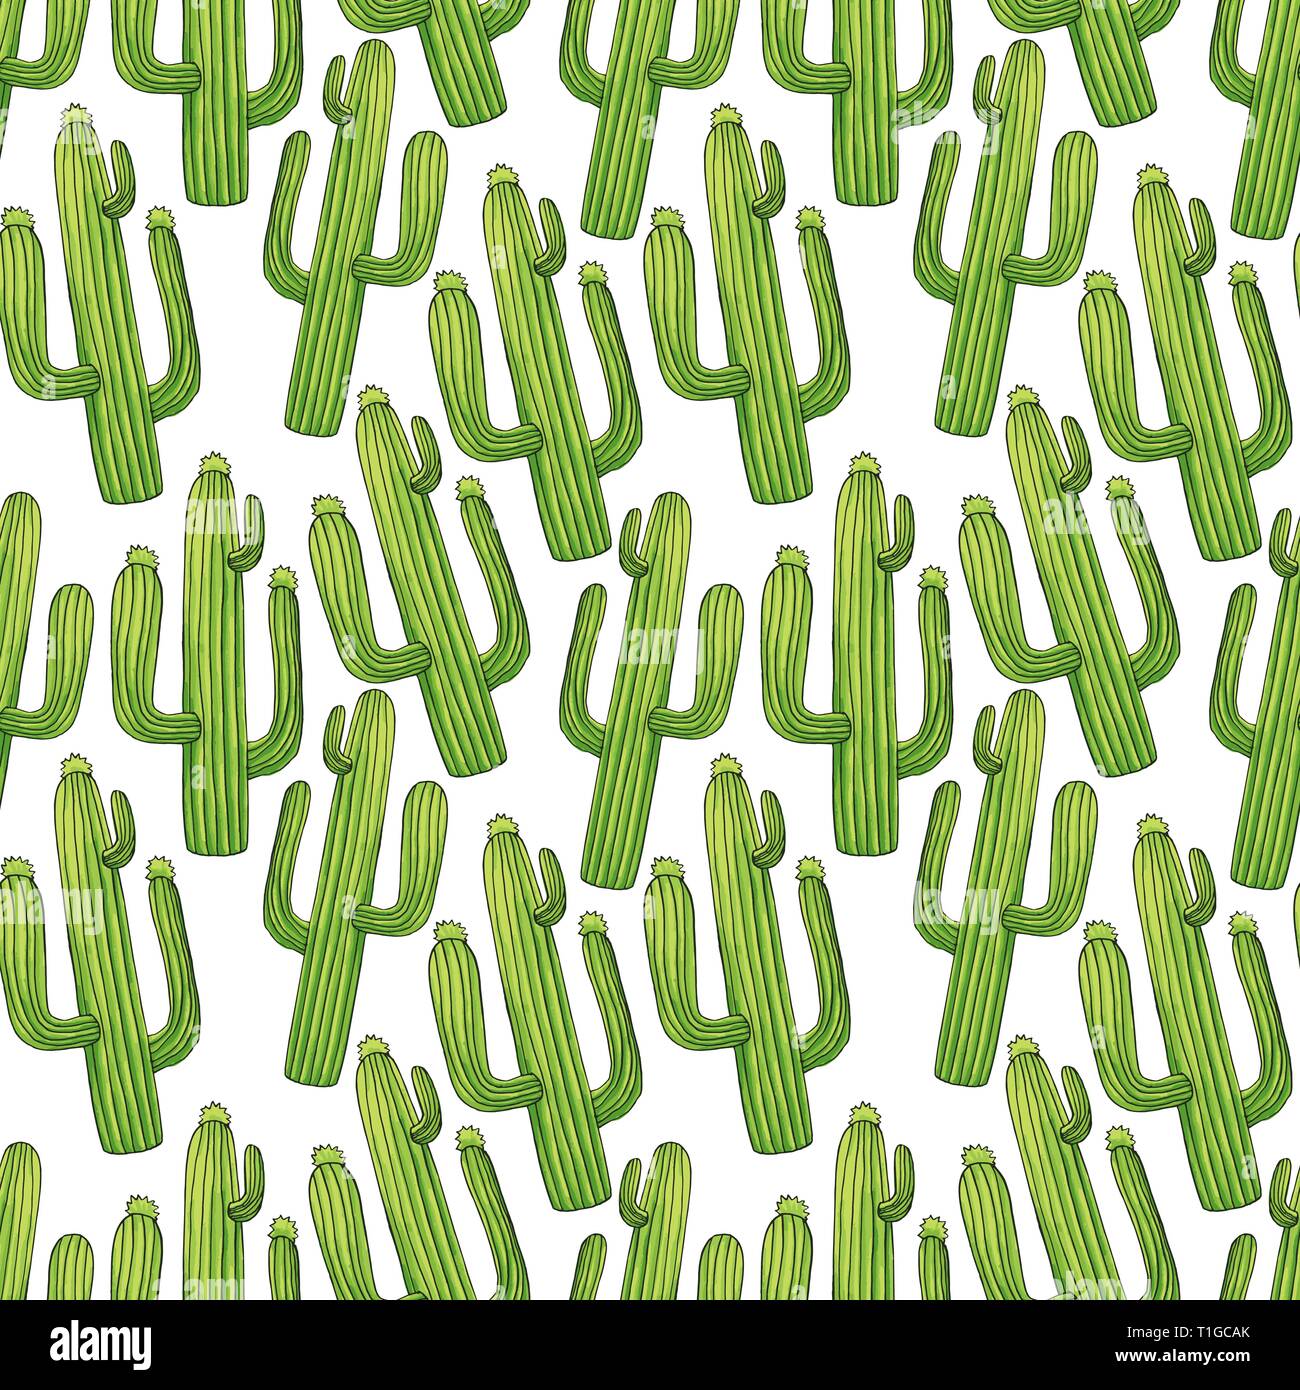 Seamless pattern with mexican cactus with spines or thorns and flowers as banner for cinco de mayo holiday or celebration. Edible or eatable, esculent cacti saguaro, indian fig or mammillaria cactus. Stock Vector